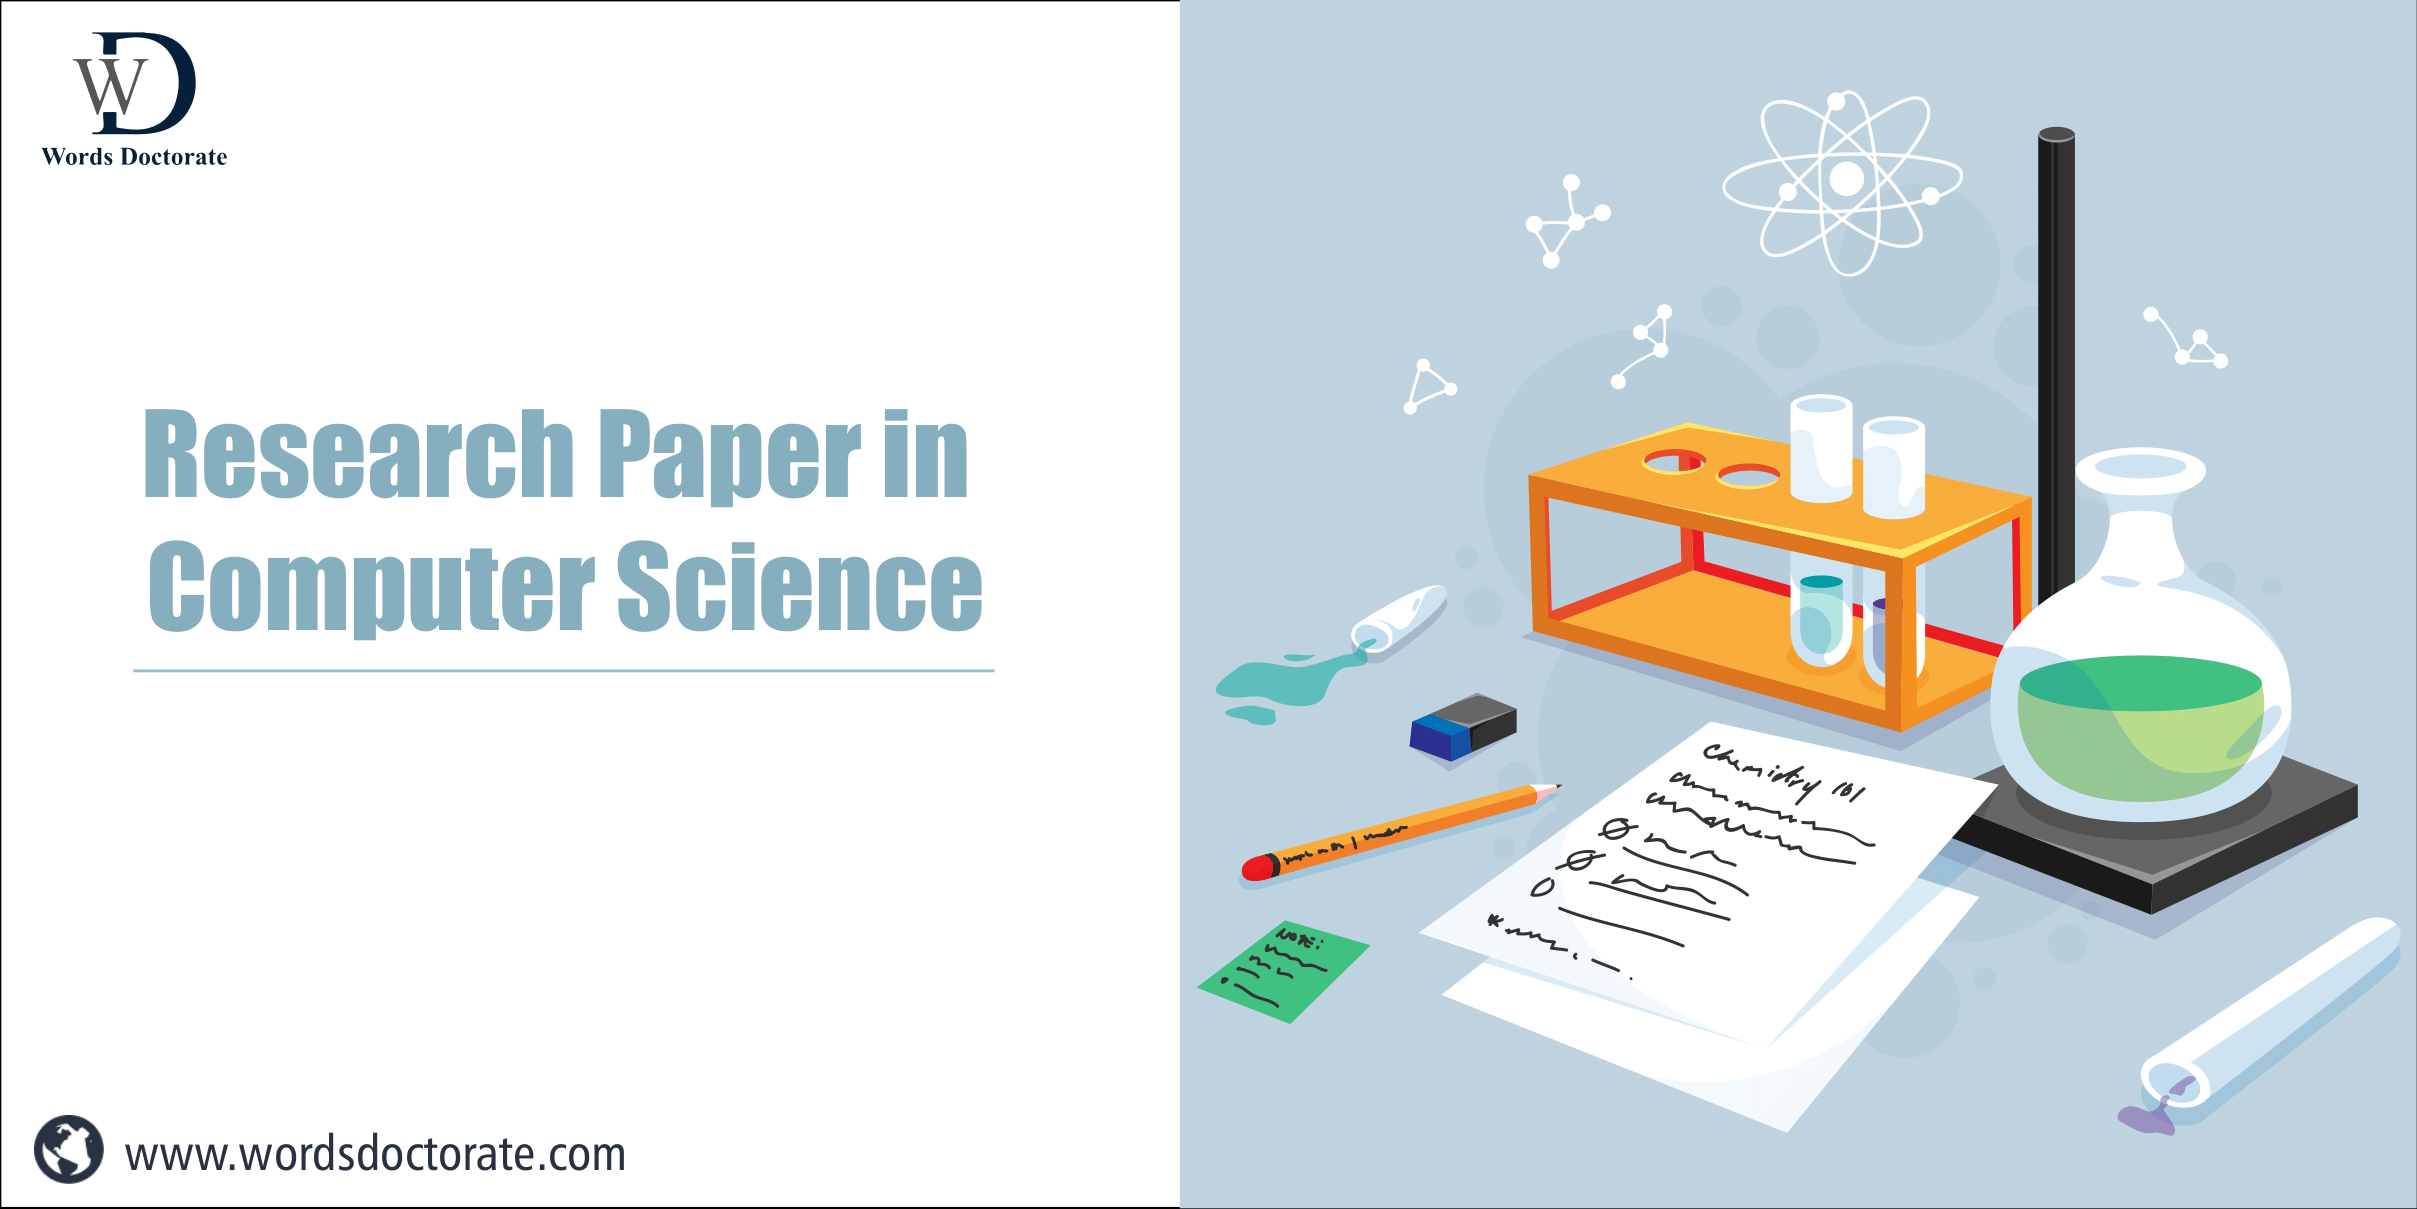 Research Paper in Computer Science